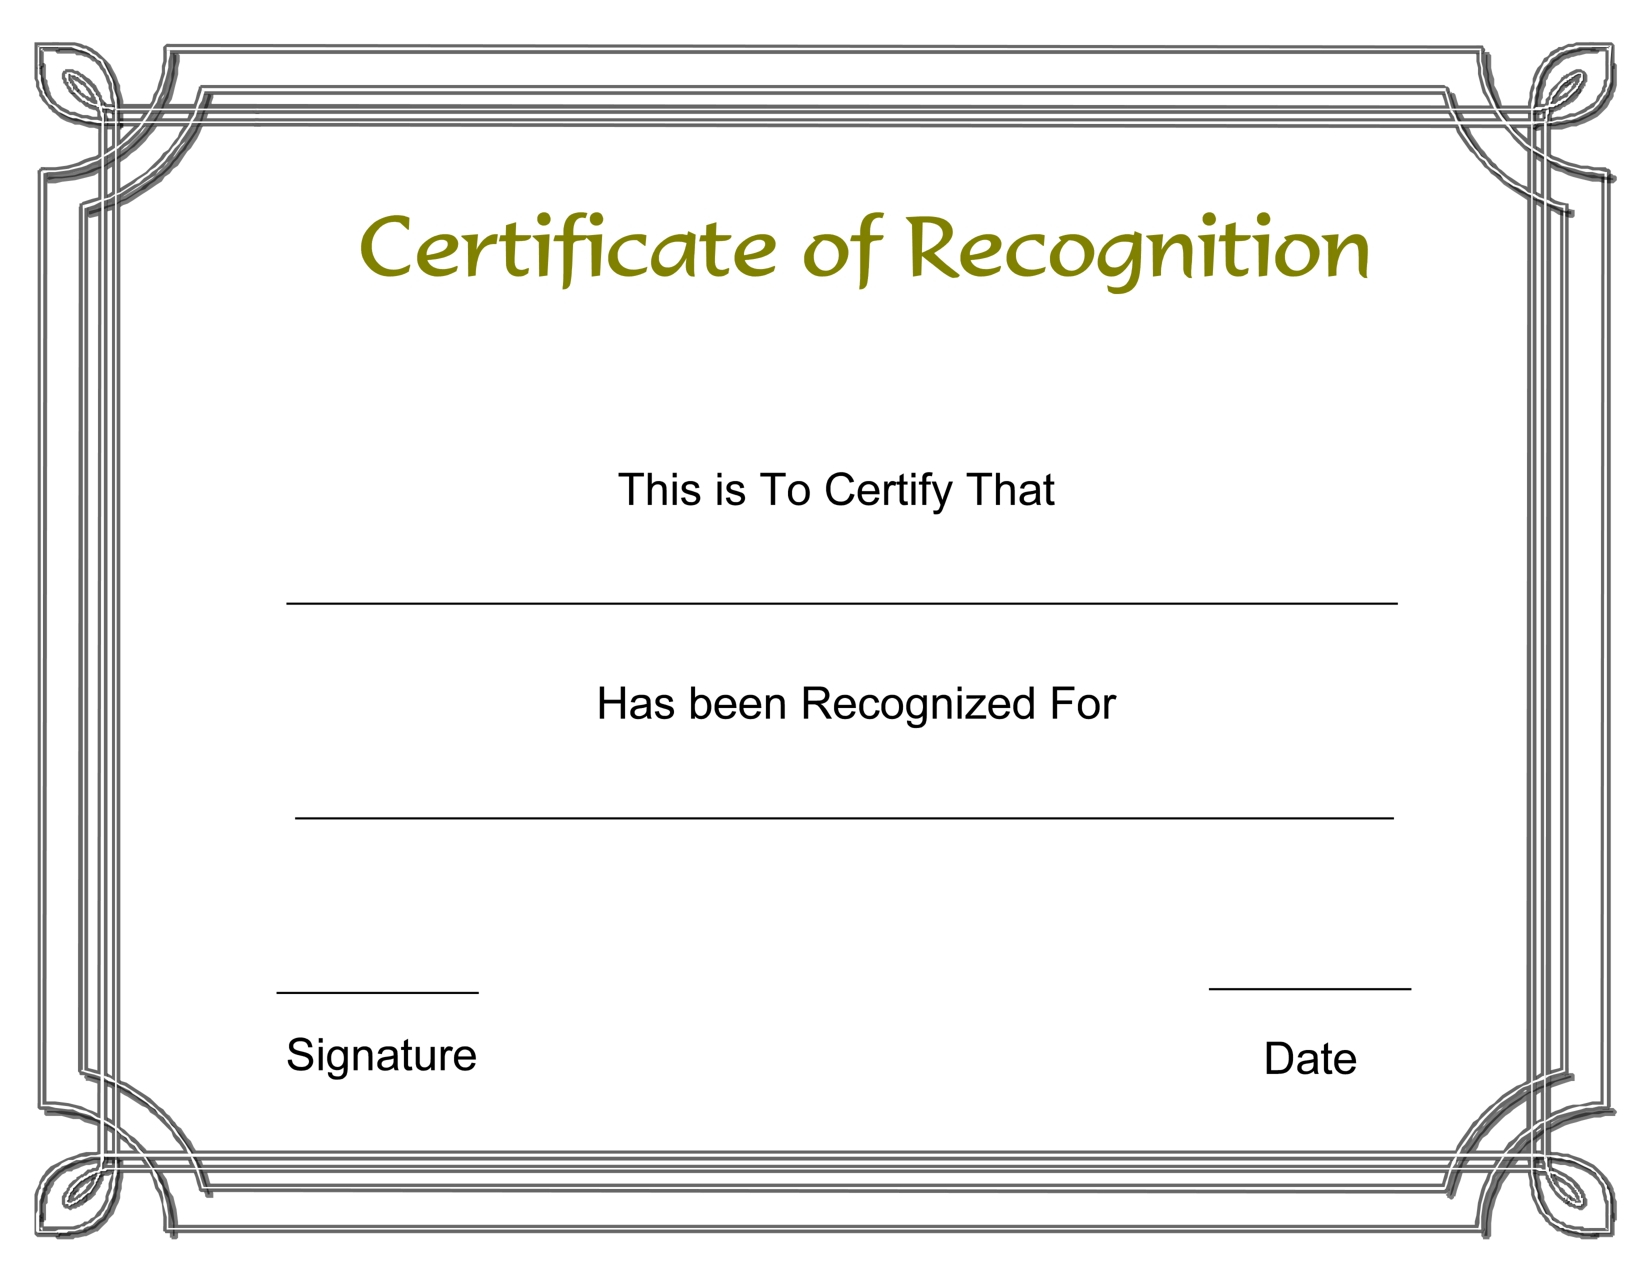 Certificate Template Recognition | Safebest.xyz Intended For Microsoft Word Certificate Templates